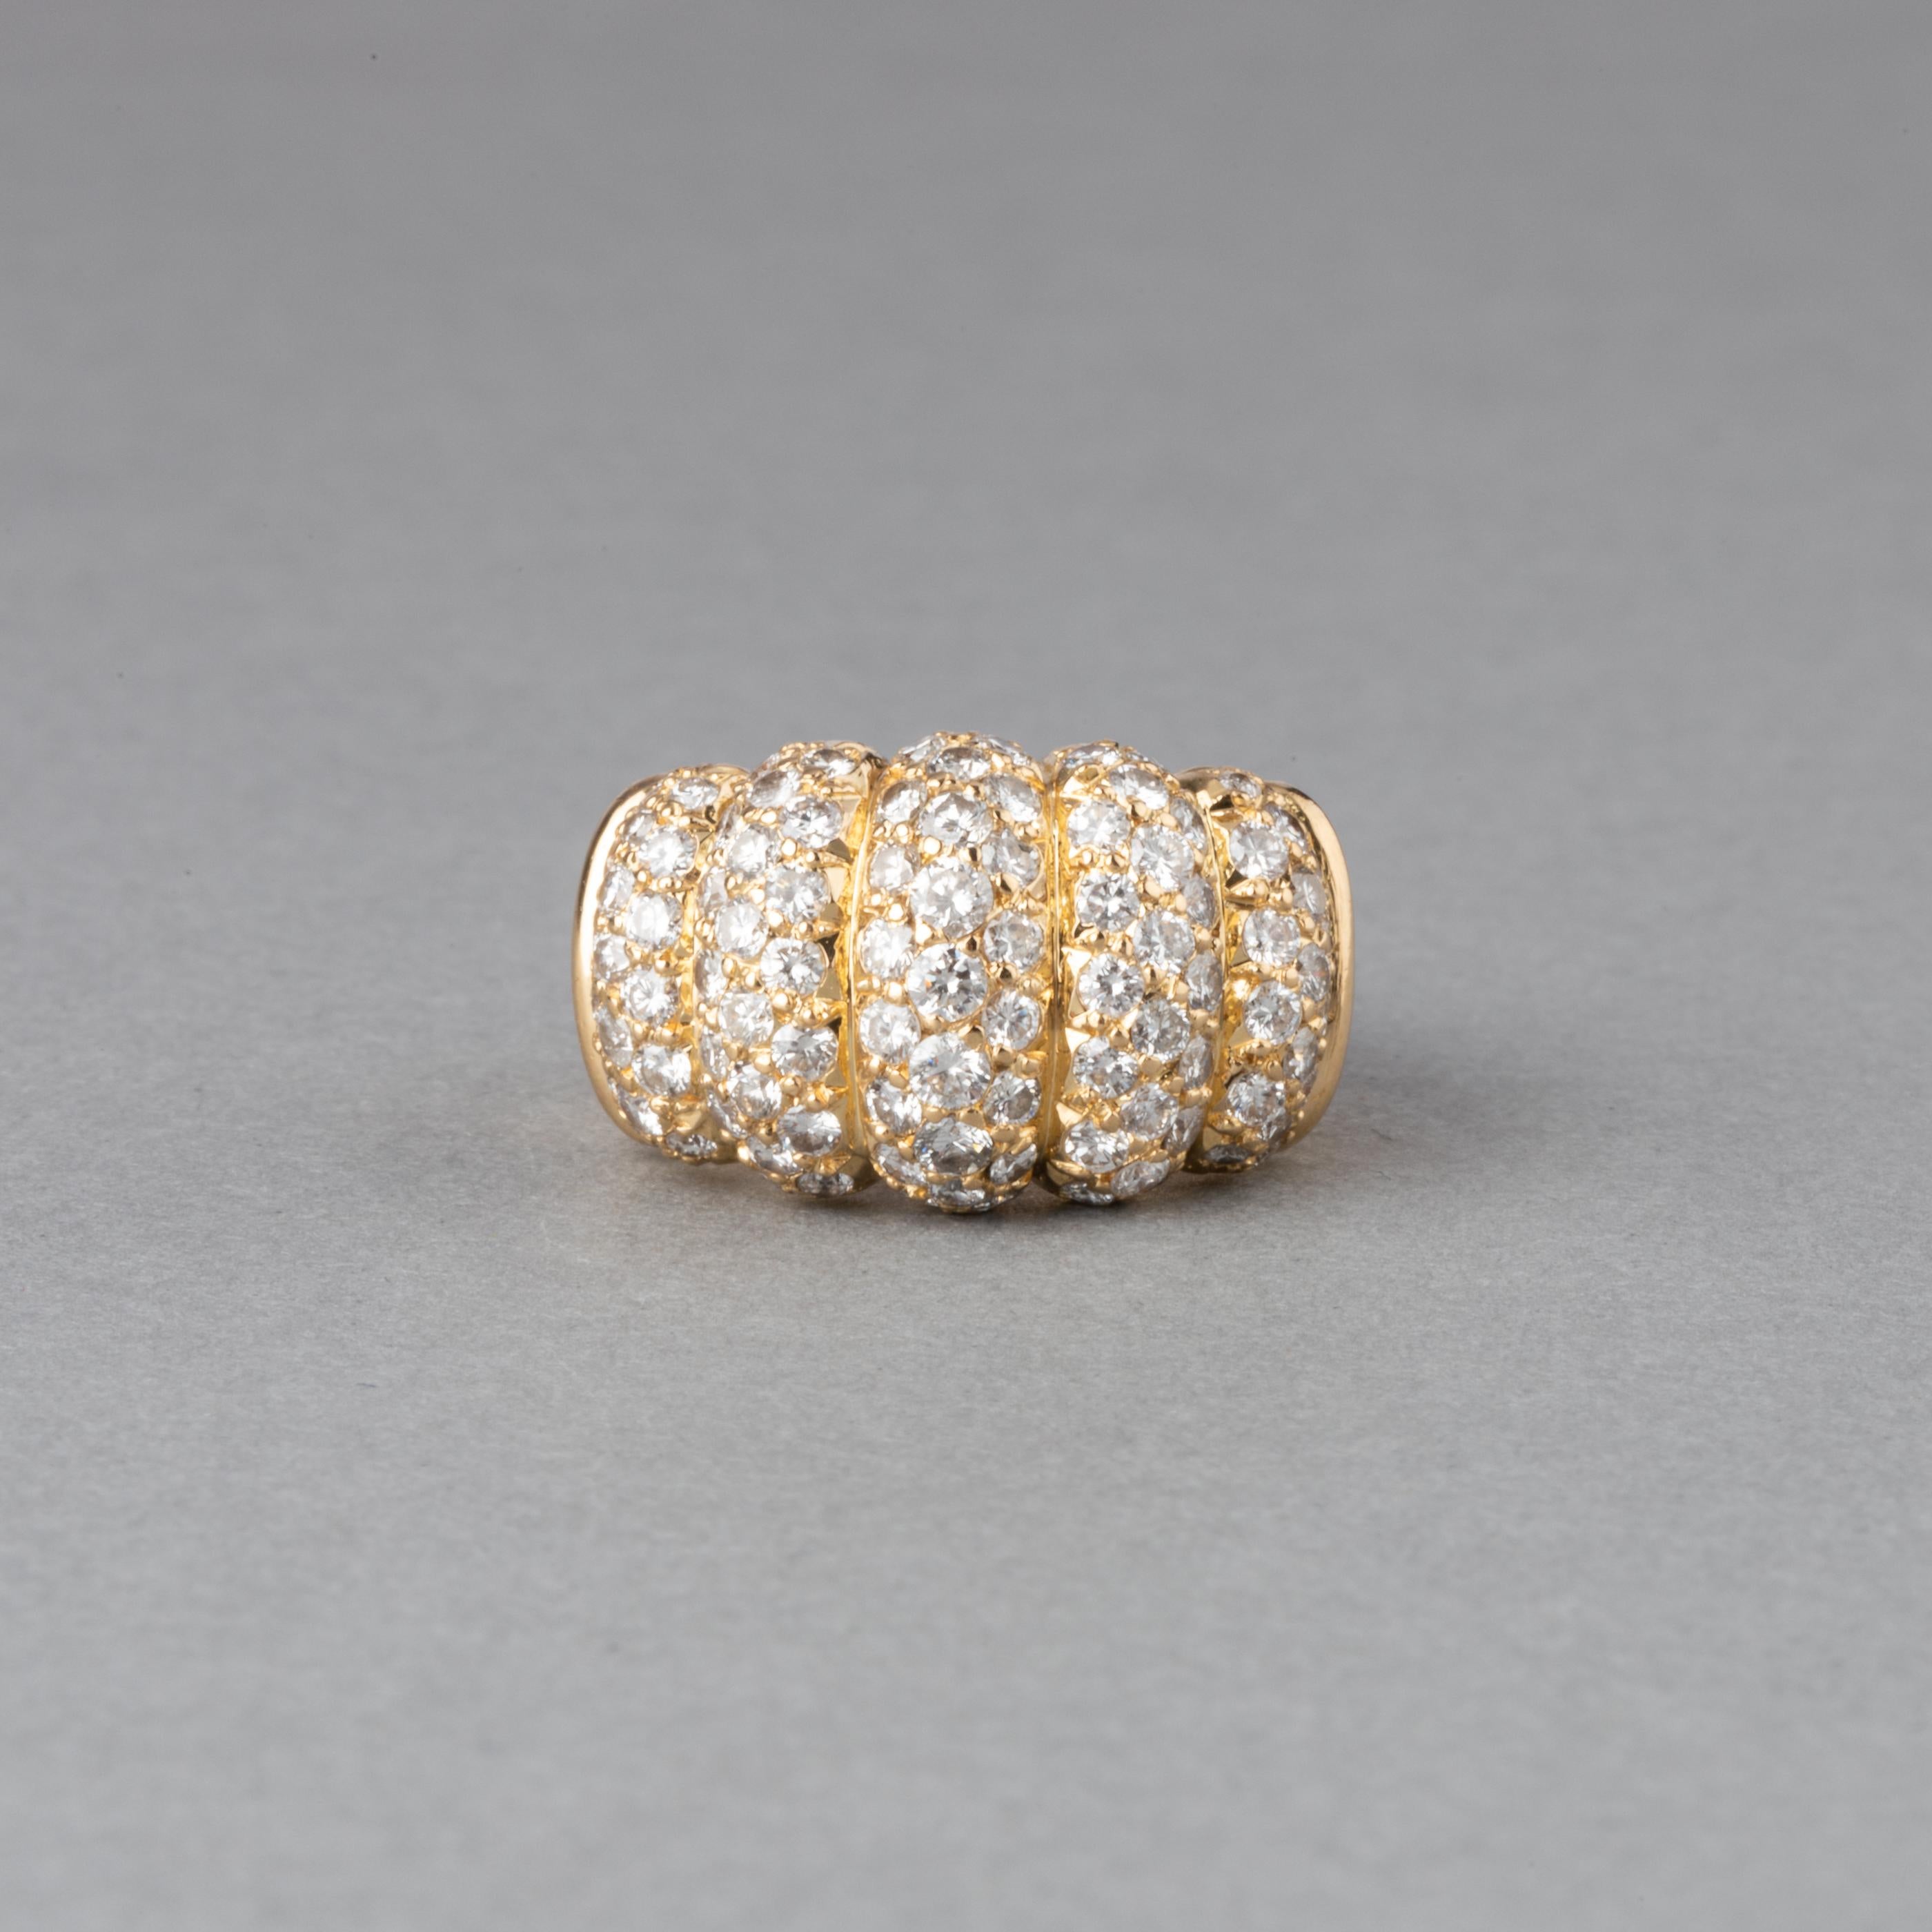 Very beautiful ring, made in France circa 1980.
Made by Van Cleef & Arpels, signed with numbers.
Size 48 , 5.5 USA, possible to resize.
Gold 18k and 2.50 carats of diamonds.
Dimensions: 12mm width, 20 mm large.
Total weight 7.10 grams.